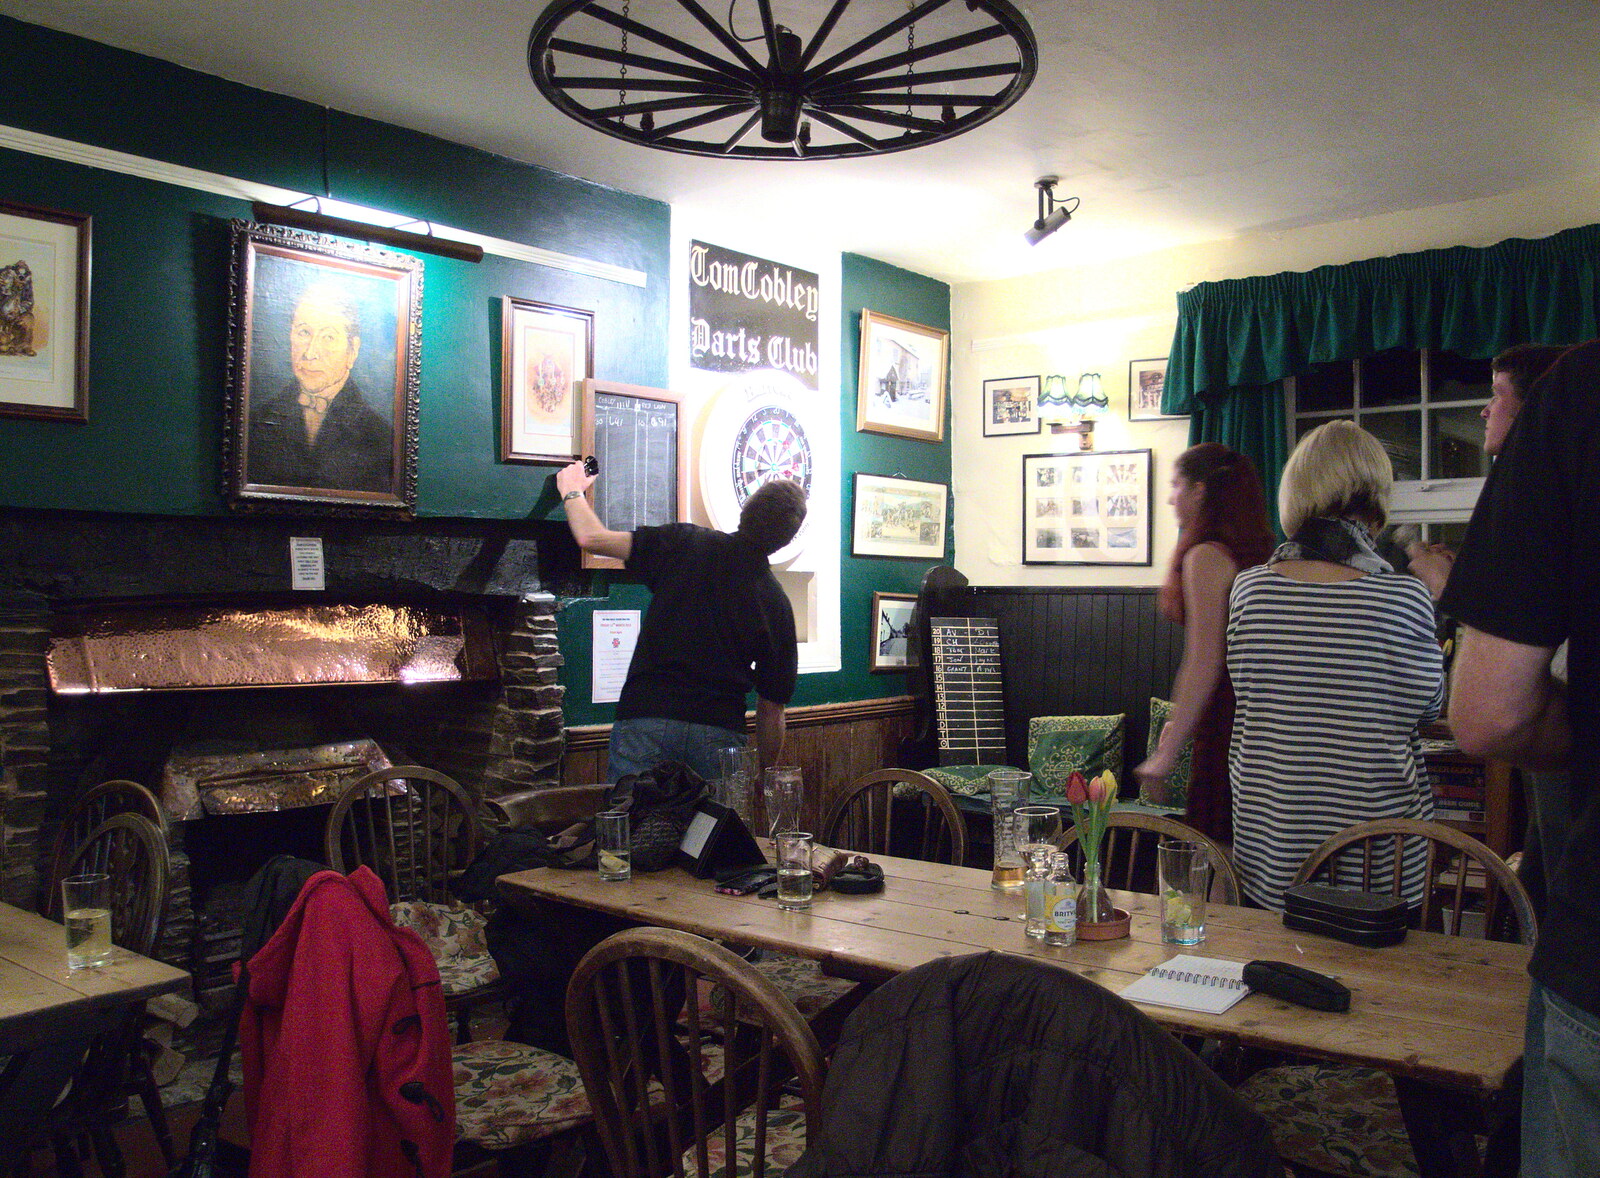 There's a darts match occurring in the Cobley from A Trip to Grandma J's, Spreyton, Devon - 18th February 2015